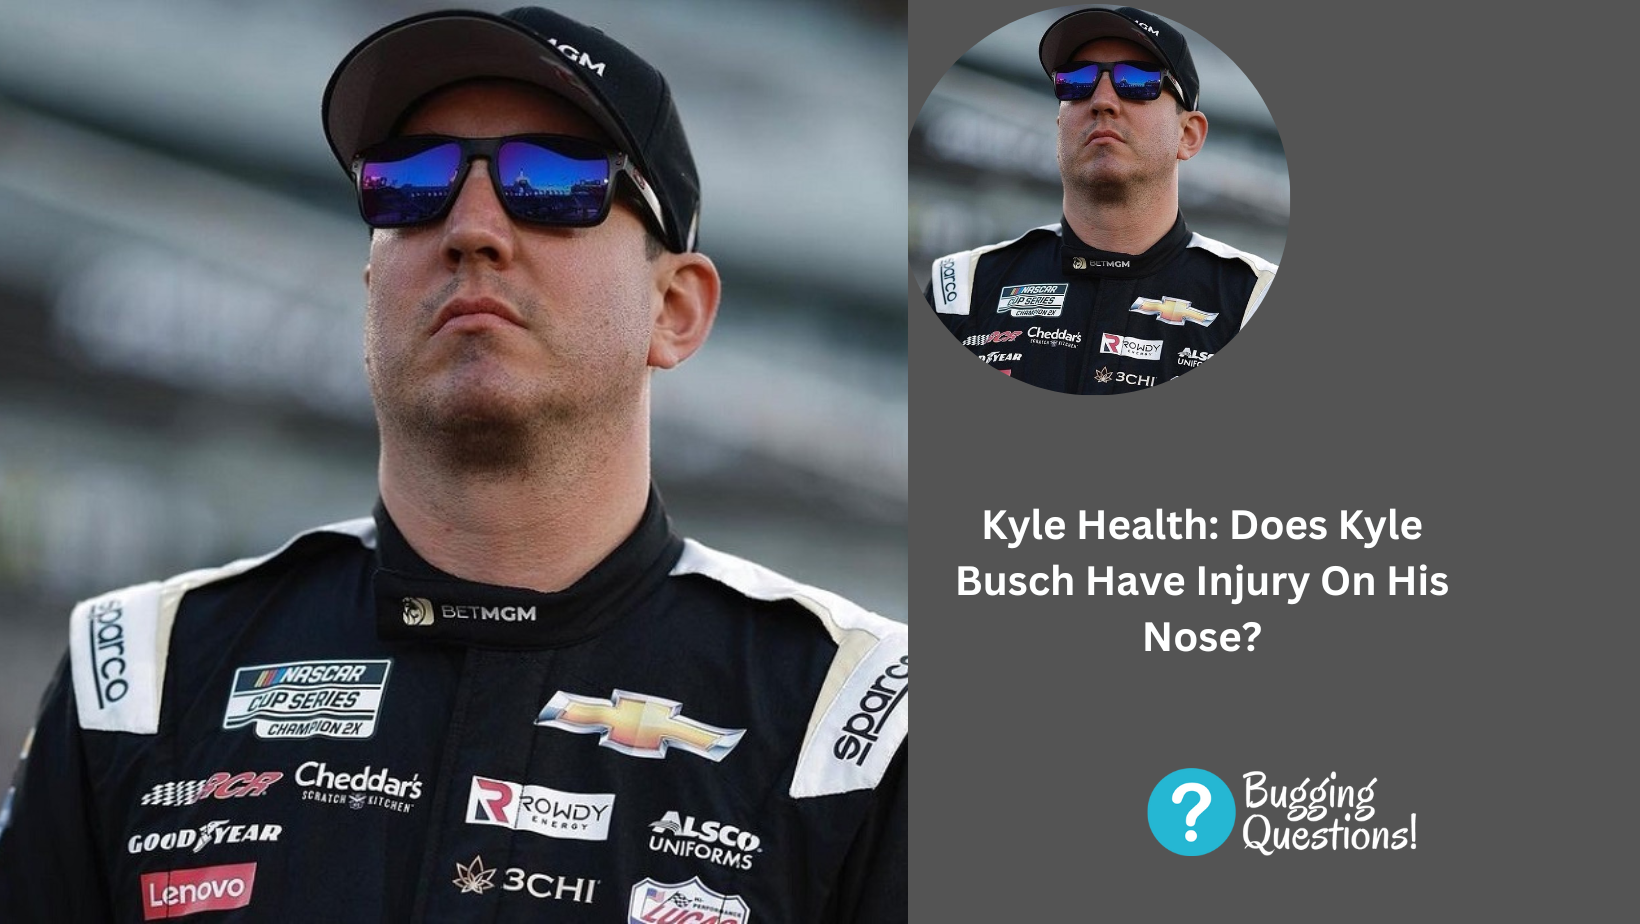 Kyle Health: Does Kyle Busch Have Injury On His Nose? Injury And Health Update Explored